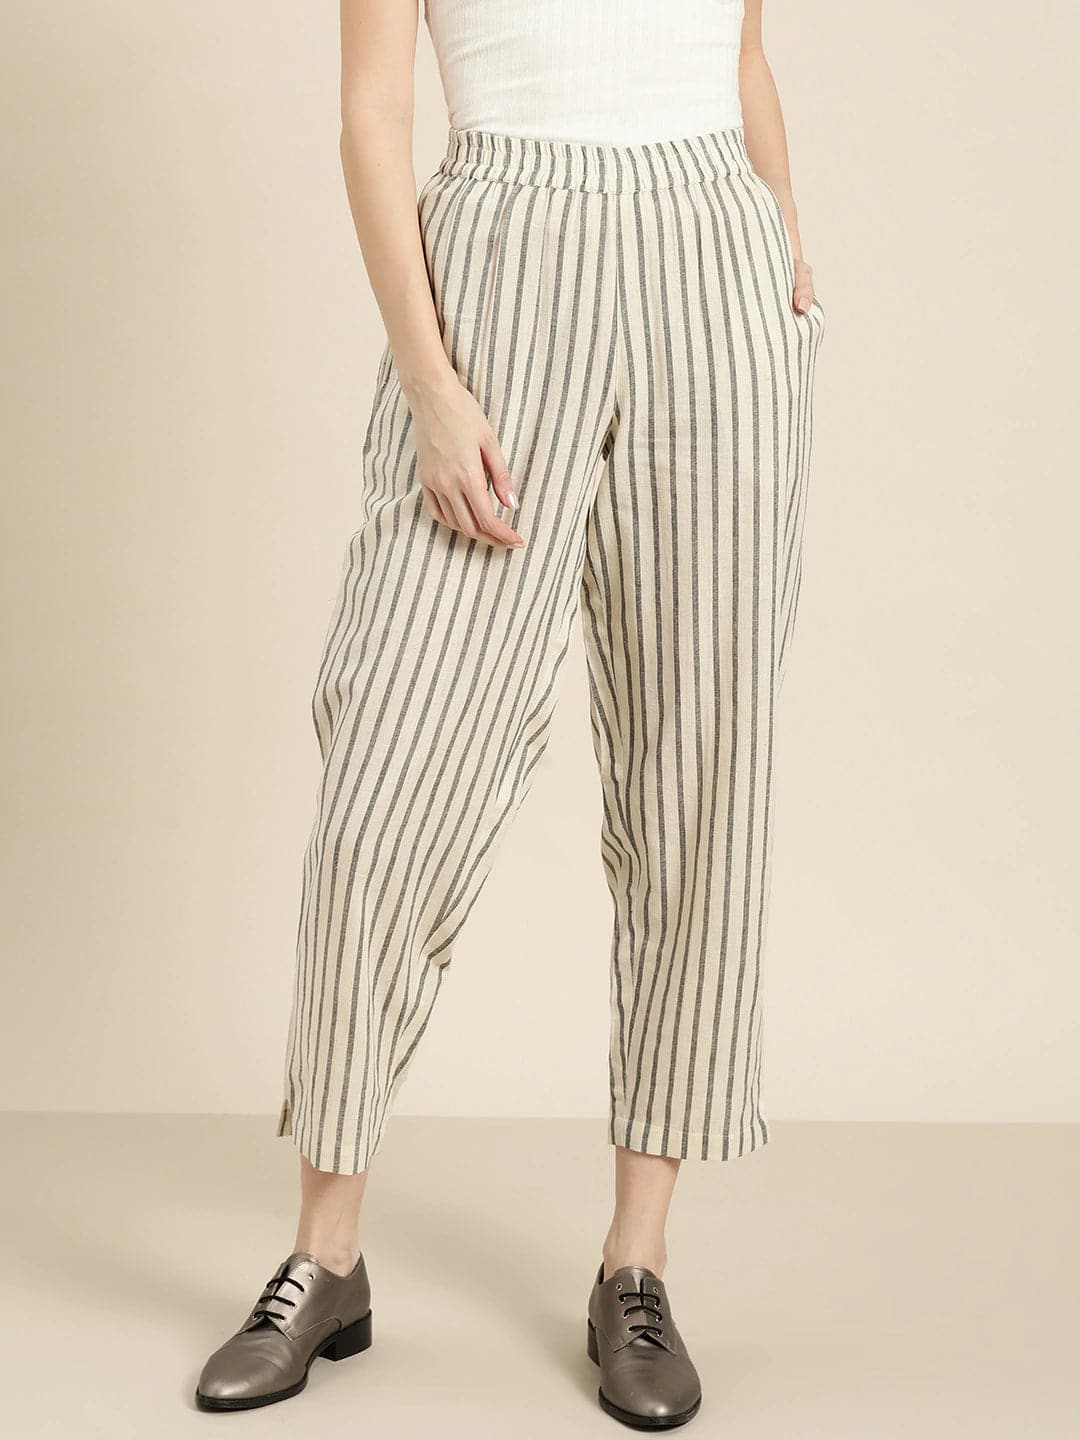 Buy Vishudh Grey and White Striped Straight Regular Trousers for Women  Online at Rs299  Ketch